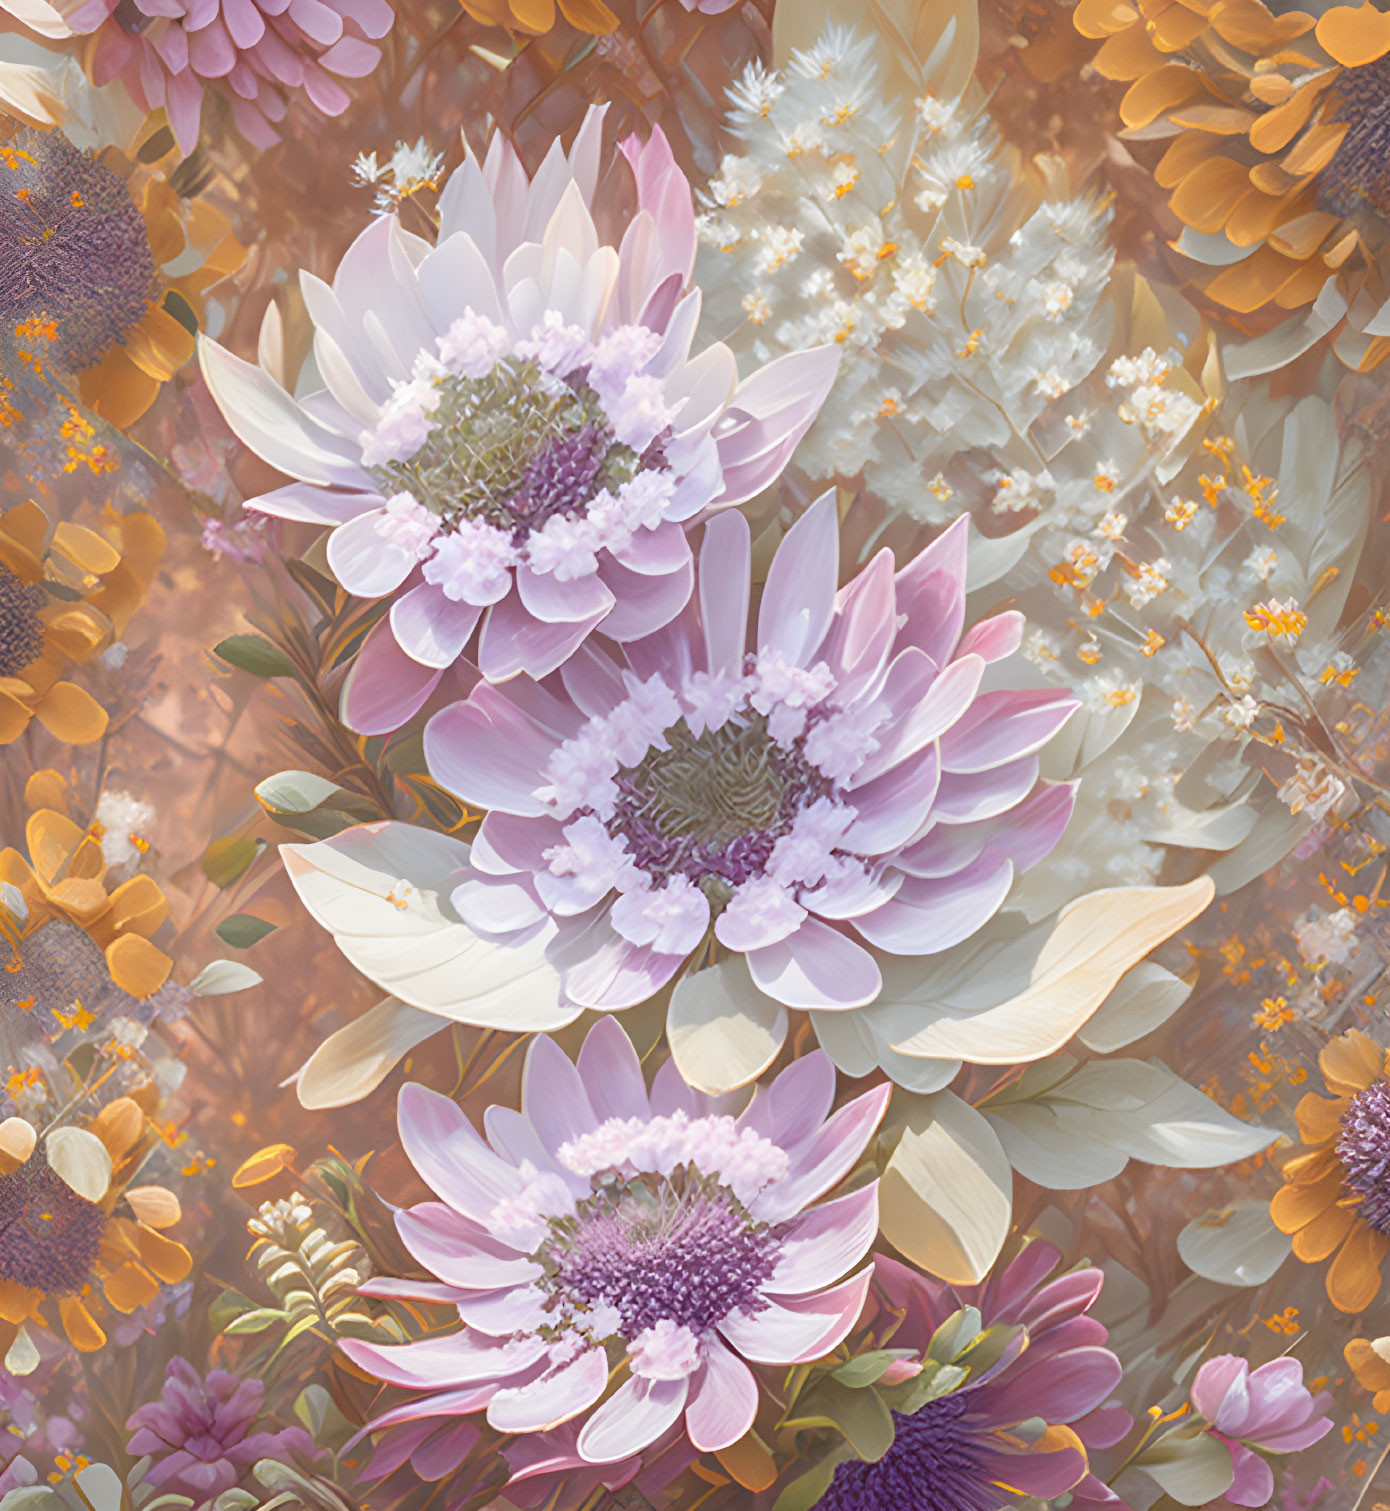 Layered Purple and White Floral Pattern with Orange Blooms